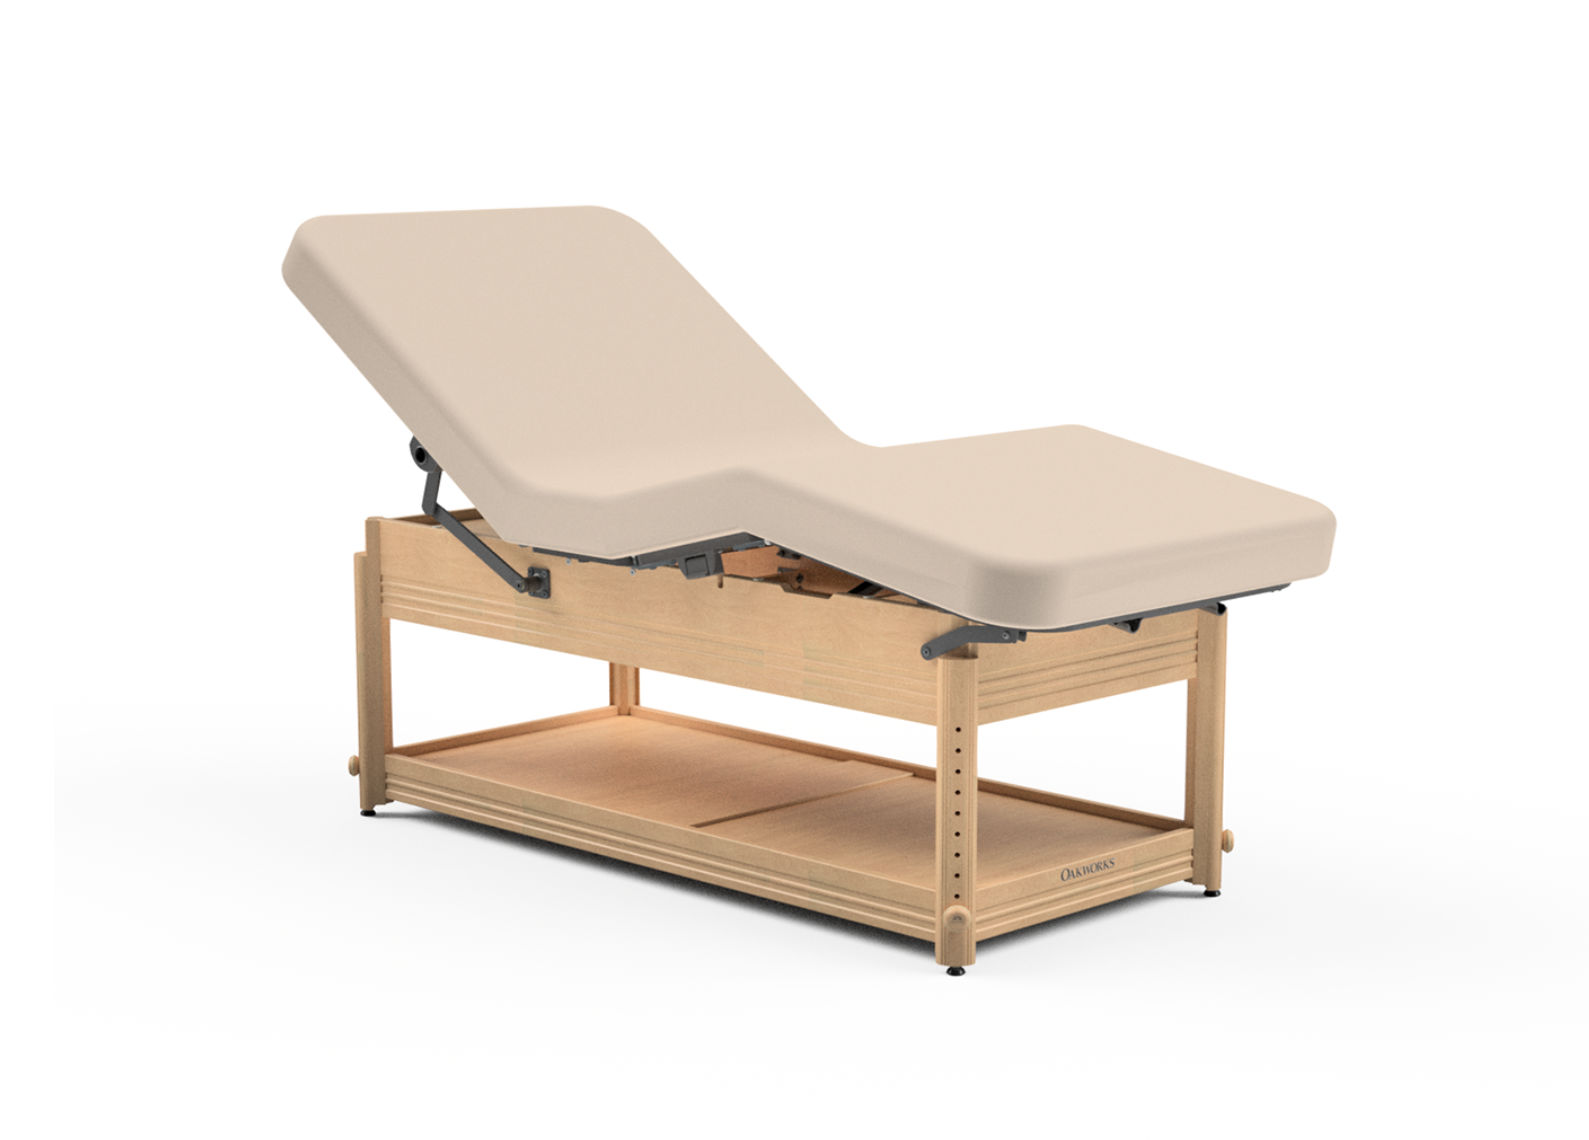 Clinician Adjustable with Lift-Assist Salon Top